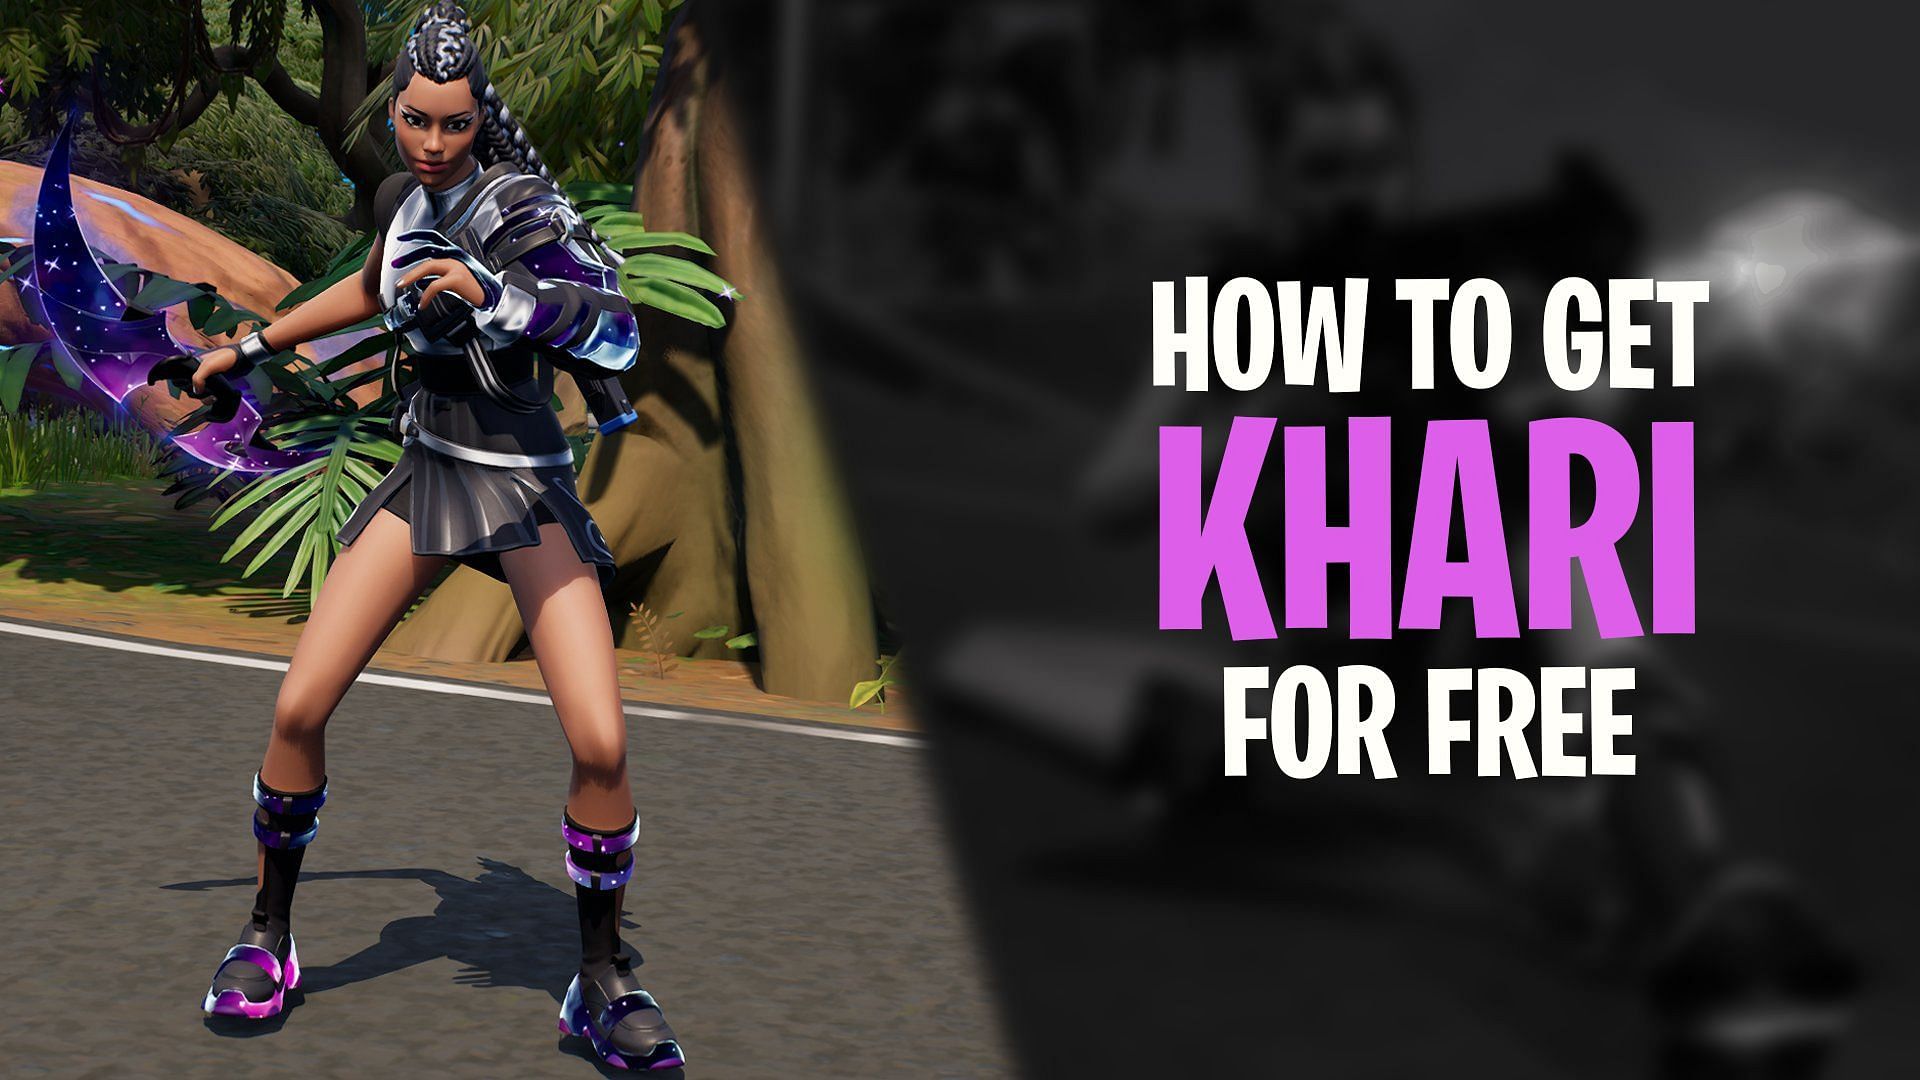 Khari skin will be obtainable for free in a Fortnite Battle Royale tournament (Image via Sportskeeda)